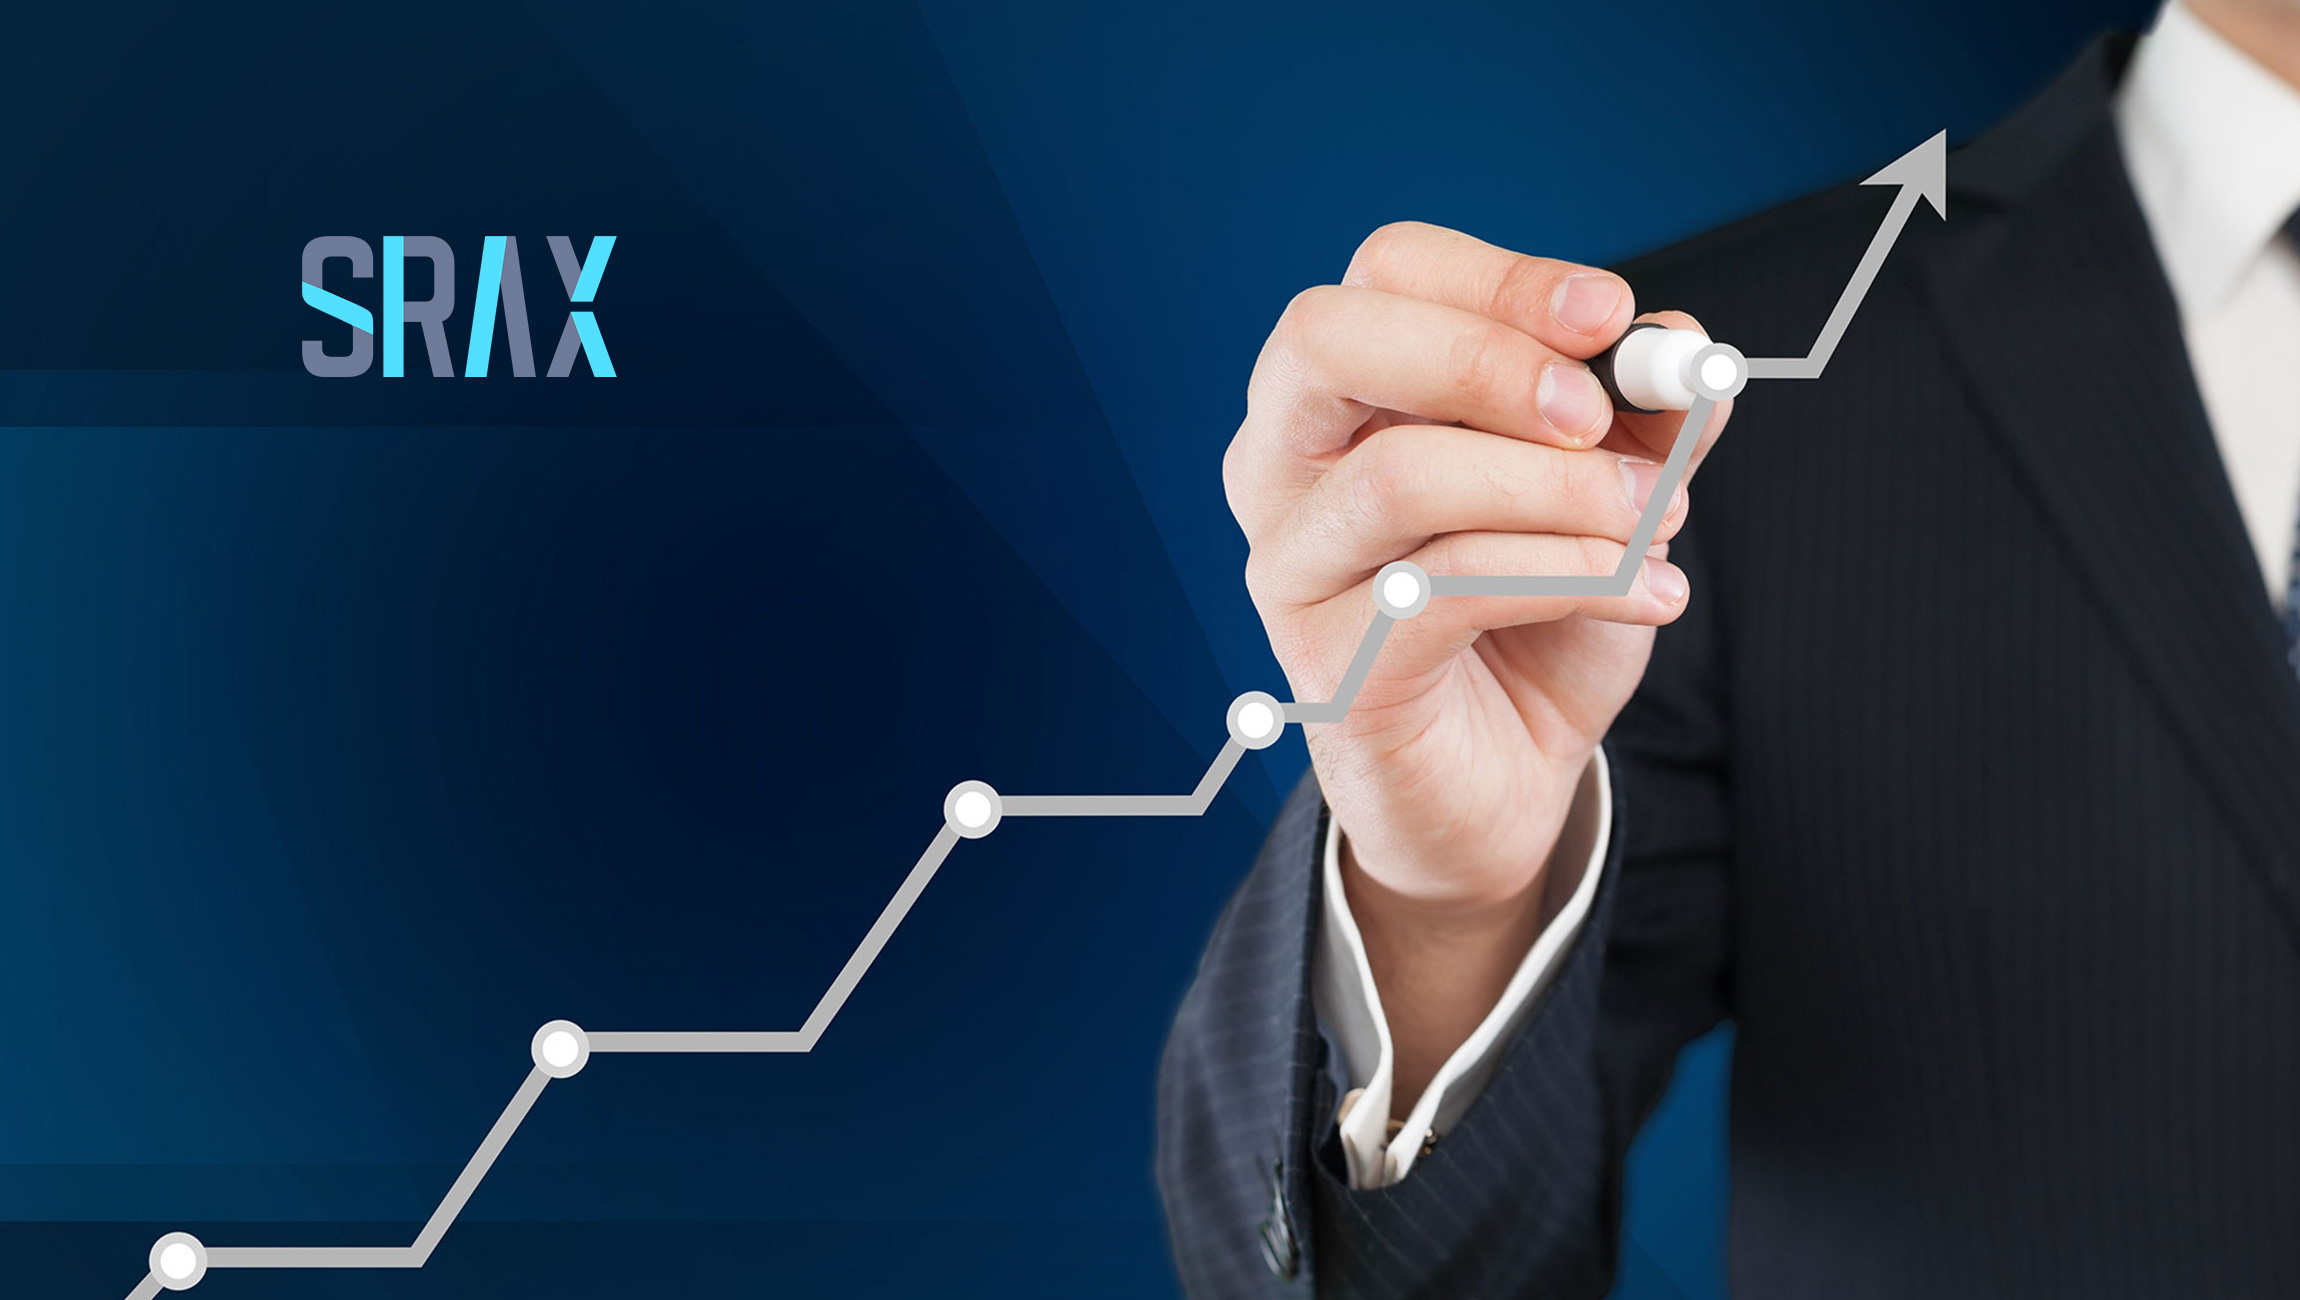 SRAX Announces Growth of SRAX IR Platform and Enhanced Features